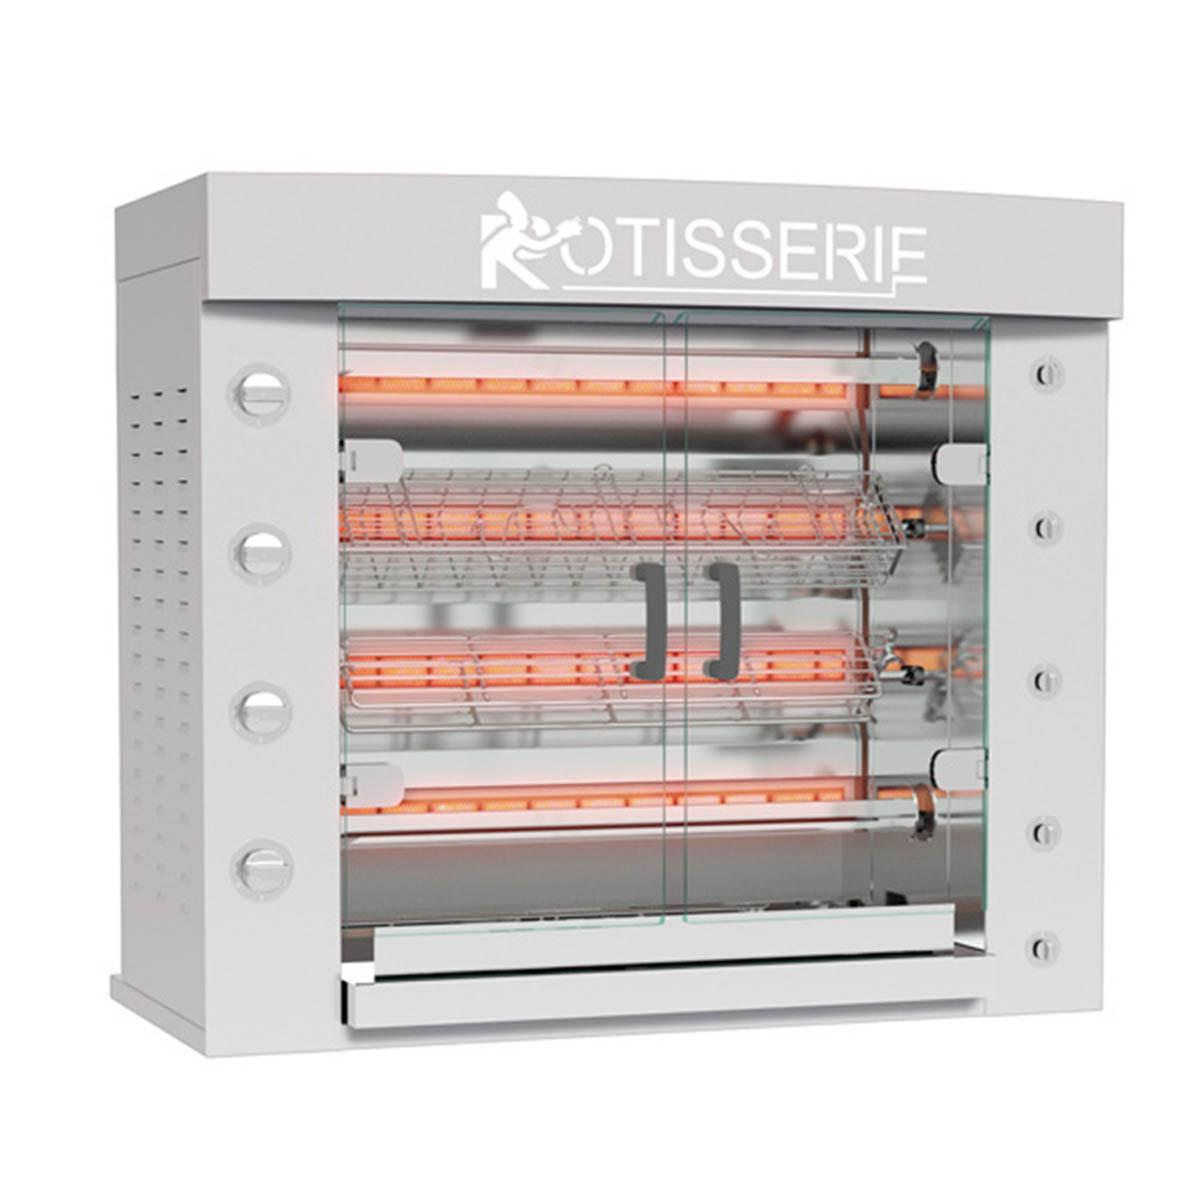 Rotisol USA FB1160-4G-SS Rotisserie Gas Oven w/ 4 Spits, Countertop, Infrared, 20-Chicken